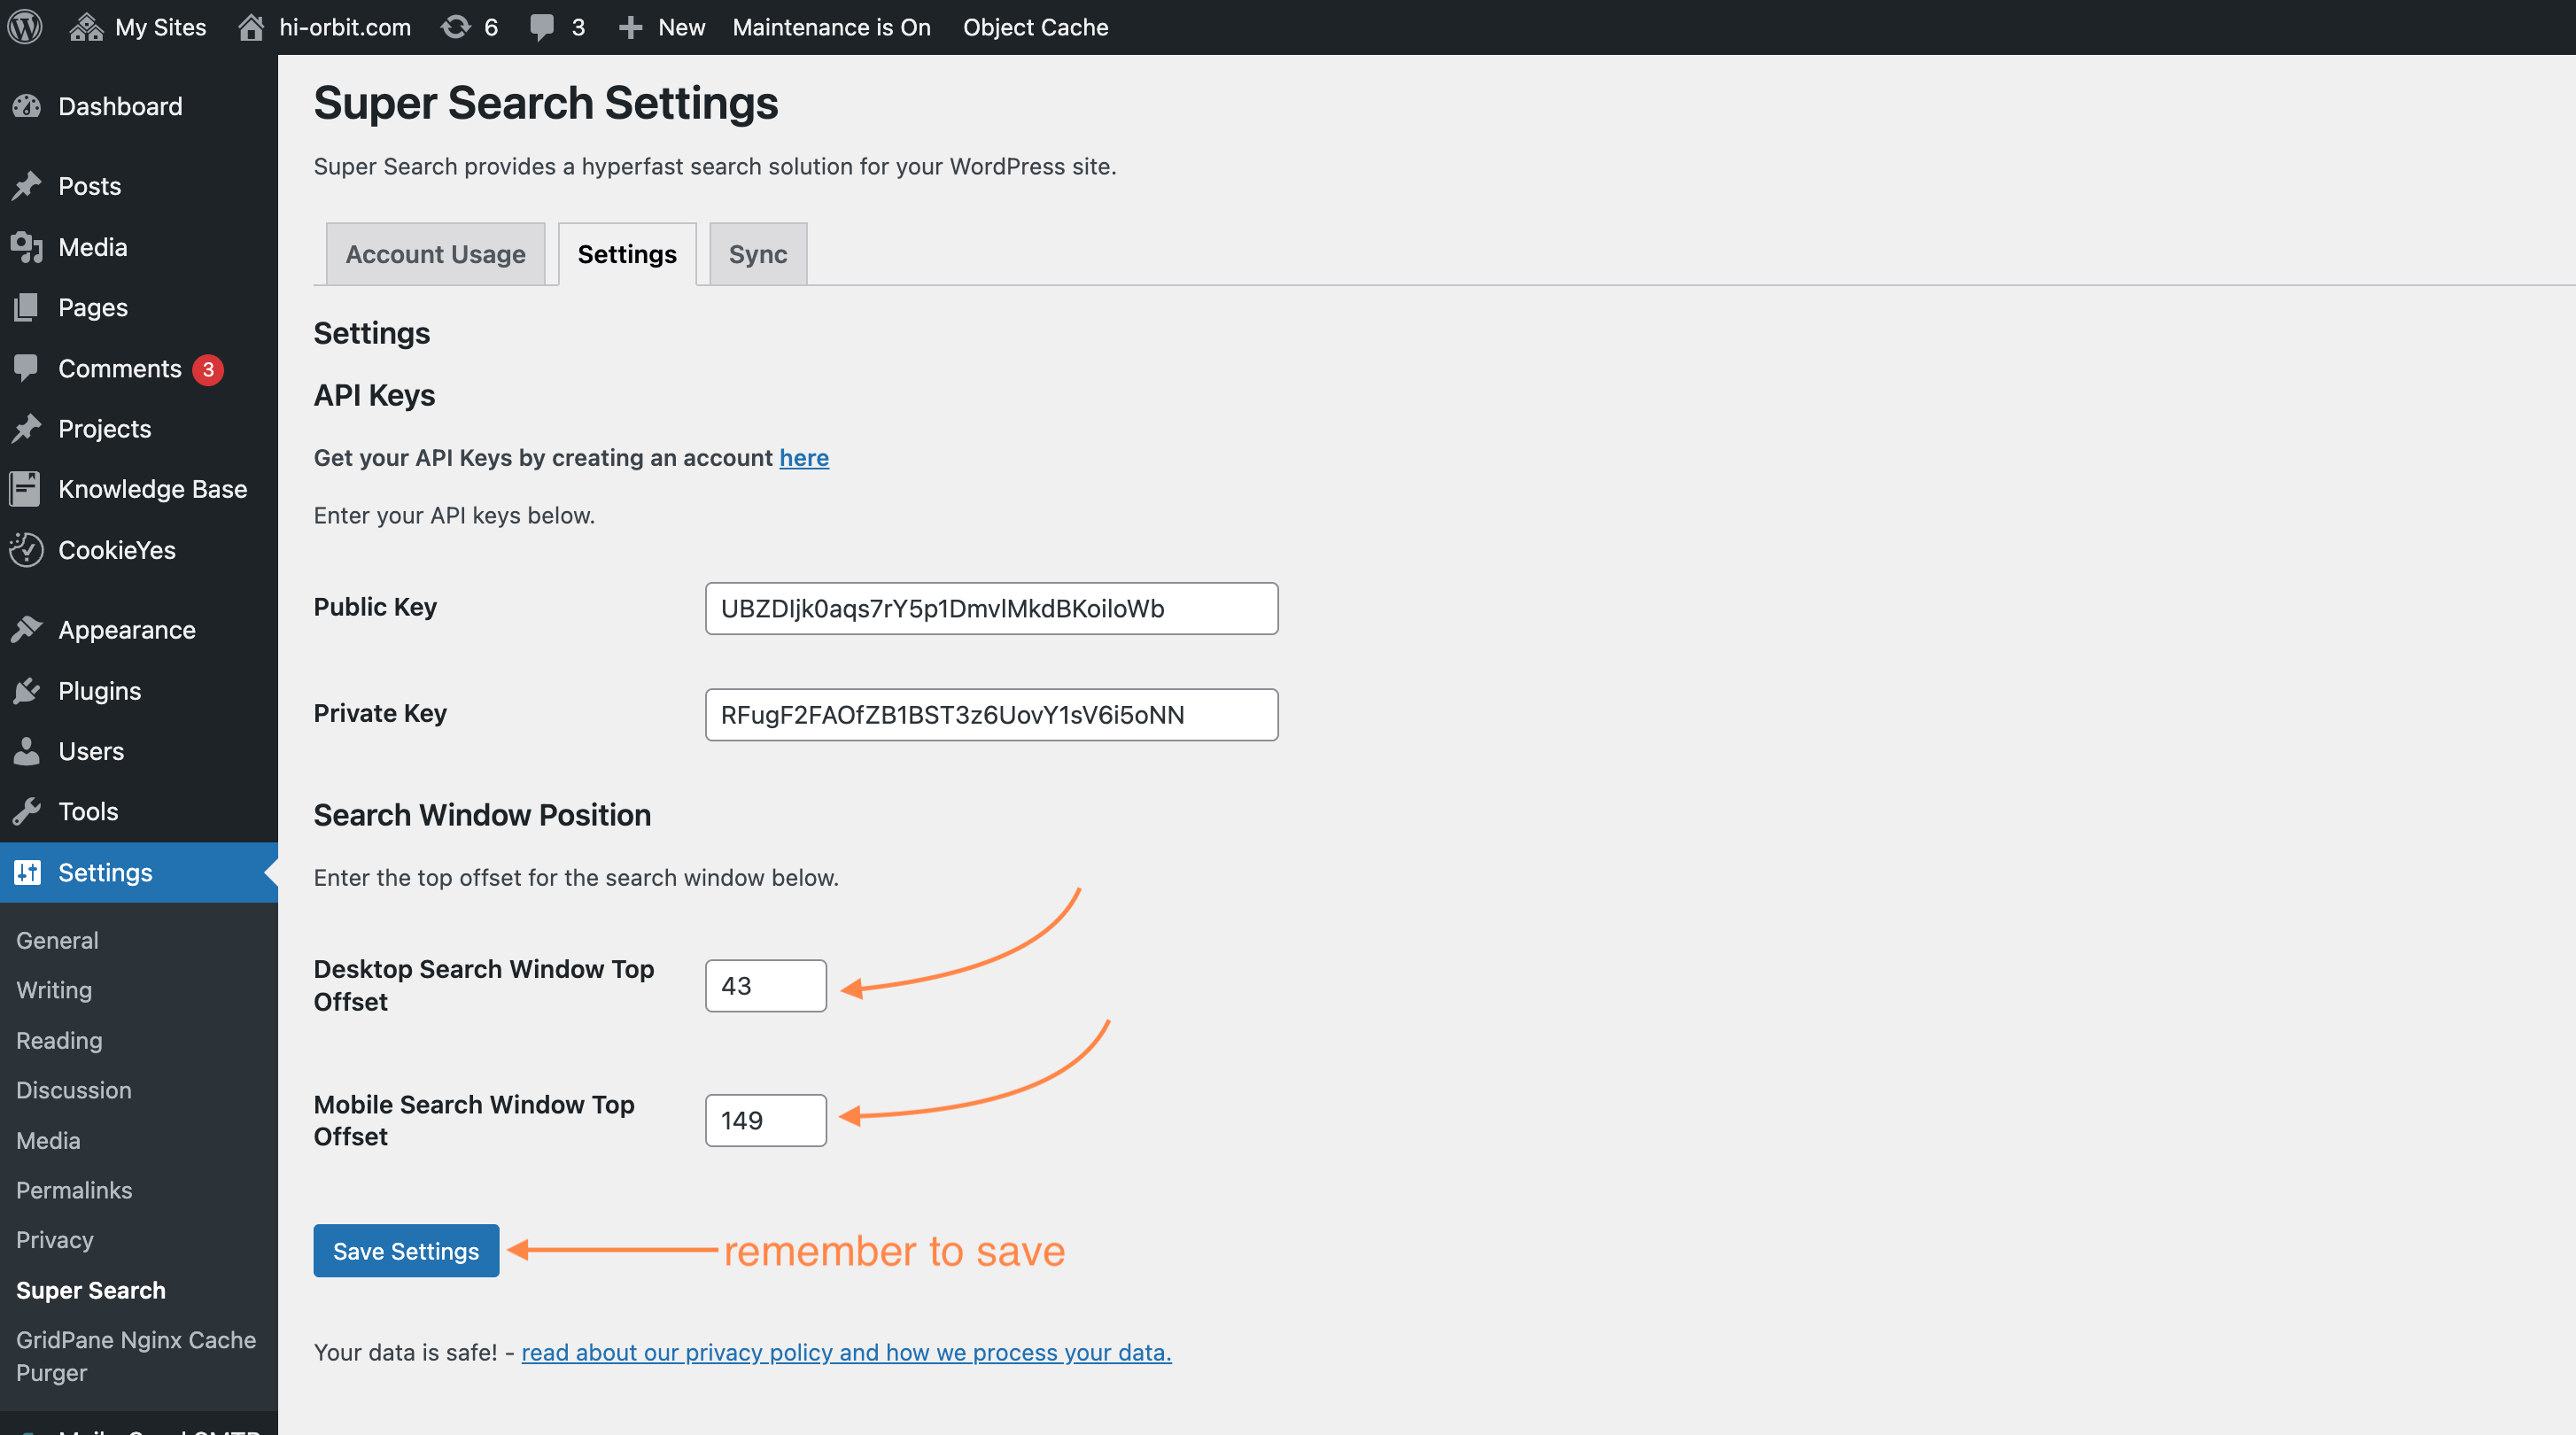 super search settings - set the search window offset